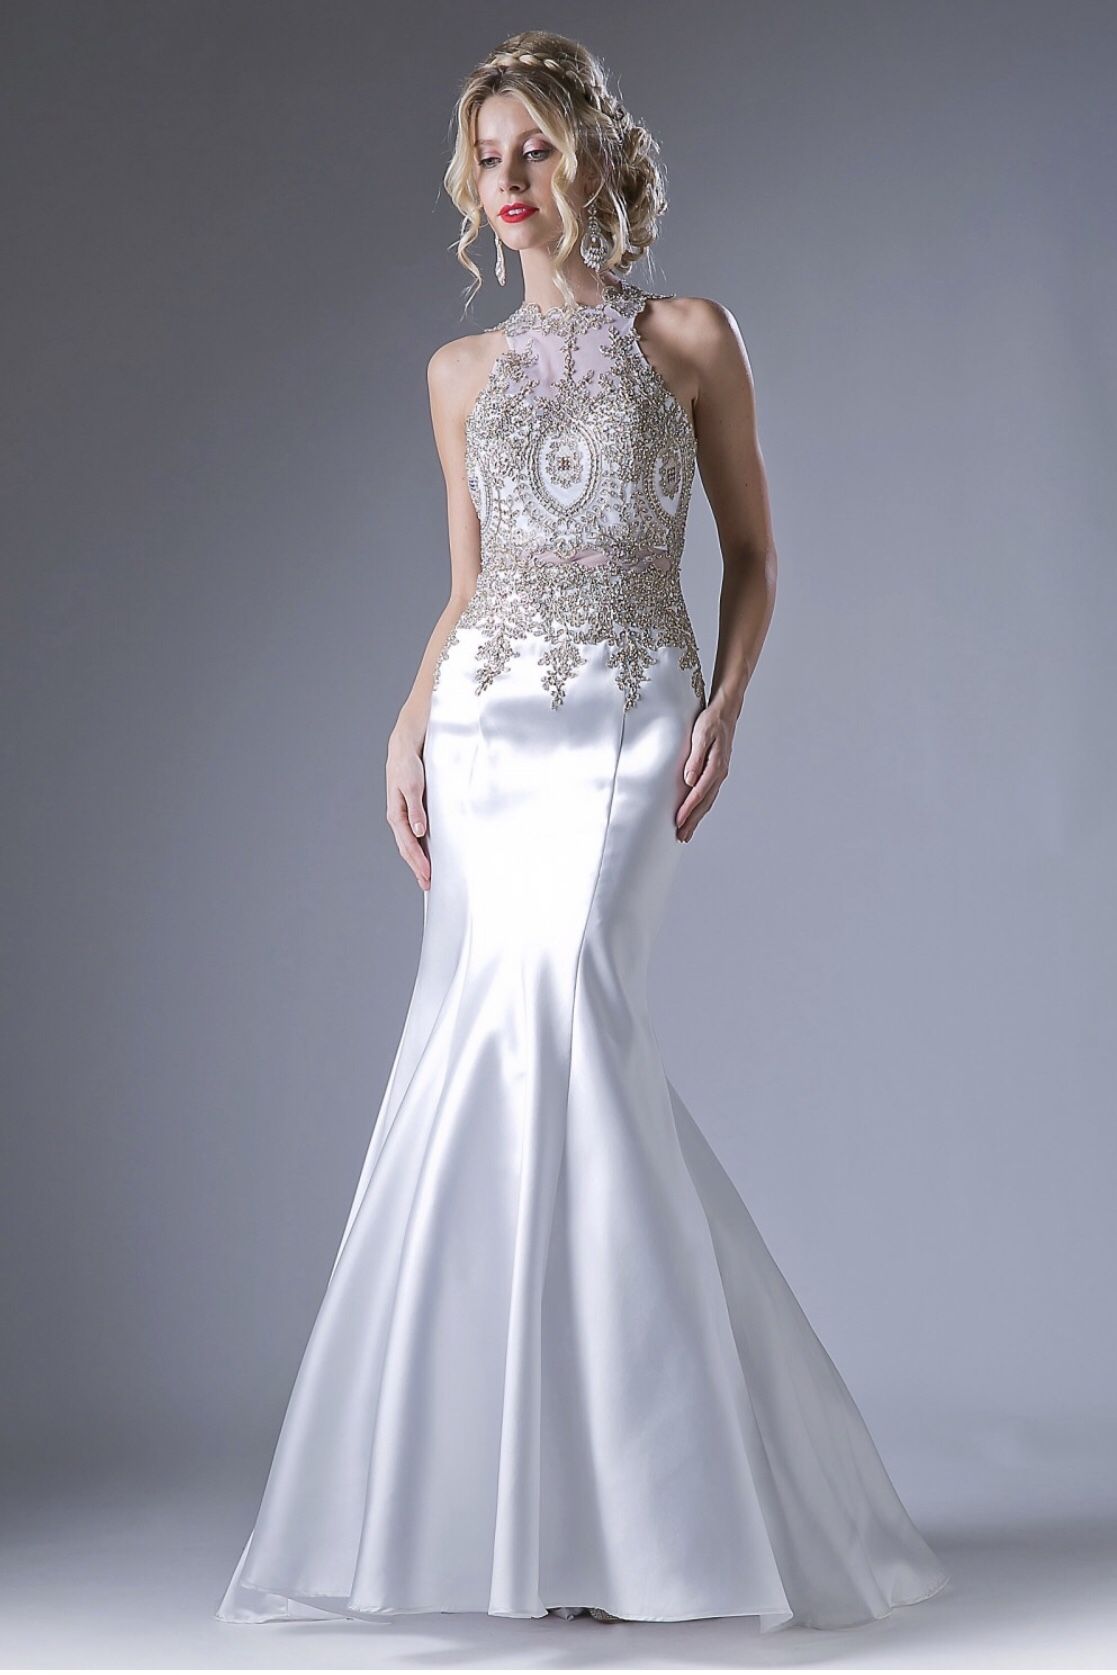 New wedding dress or Evening gown